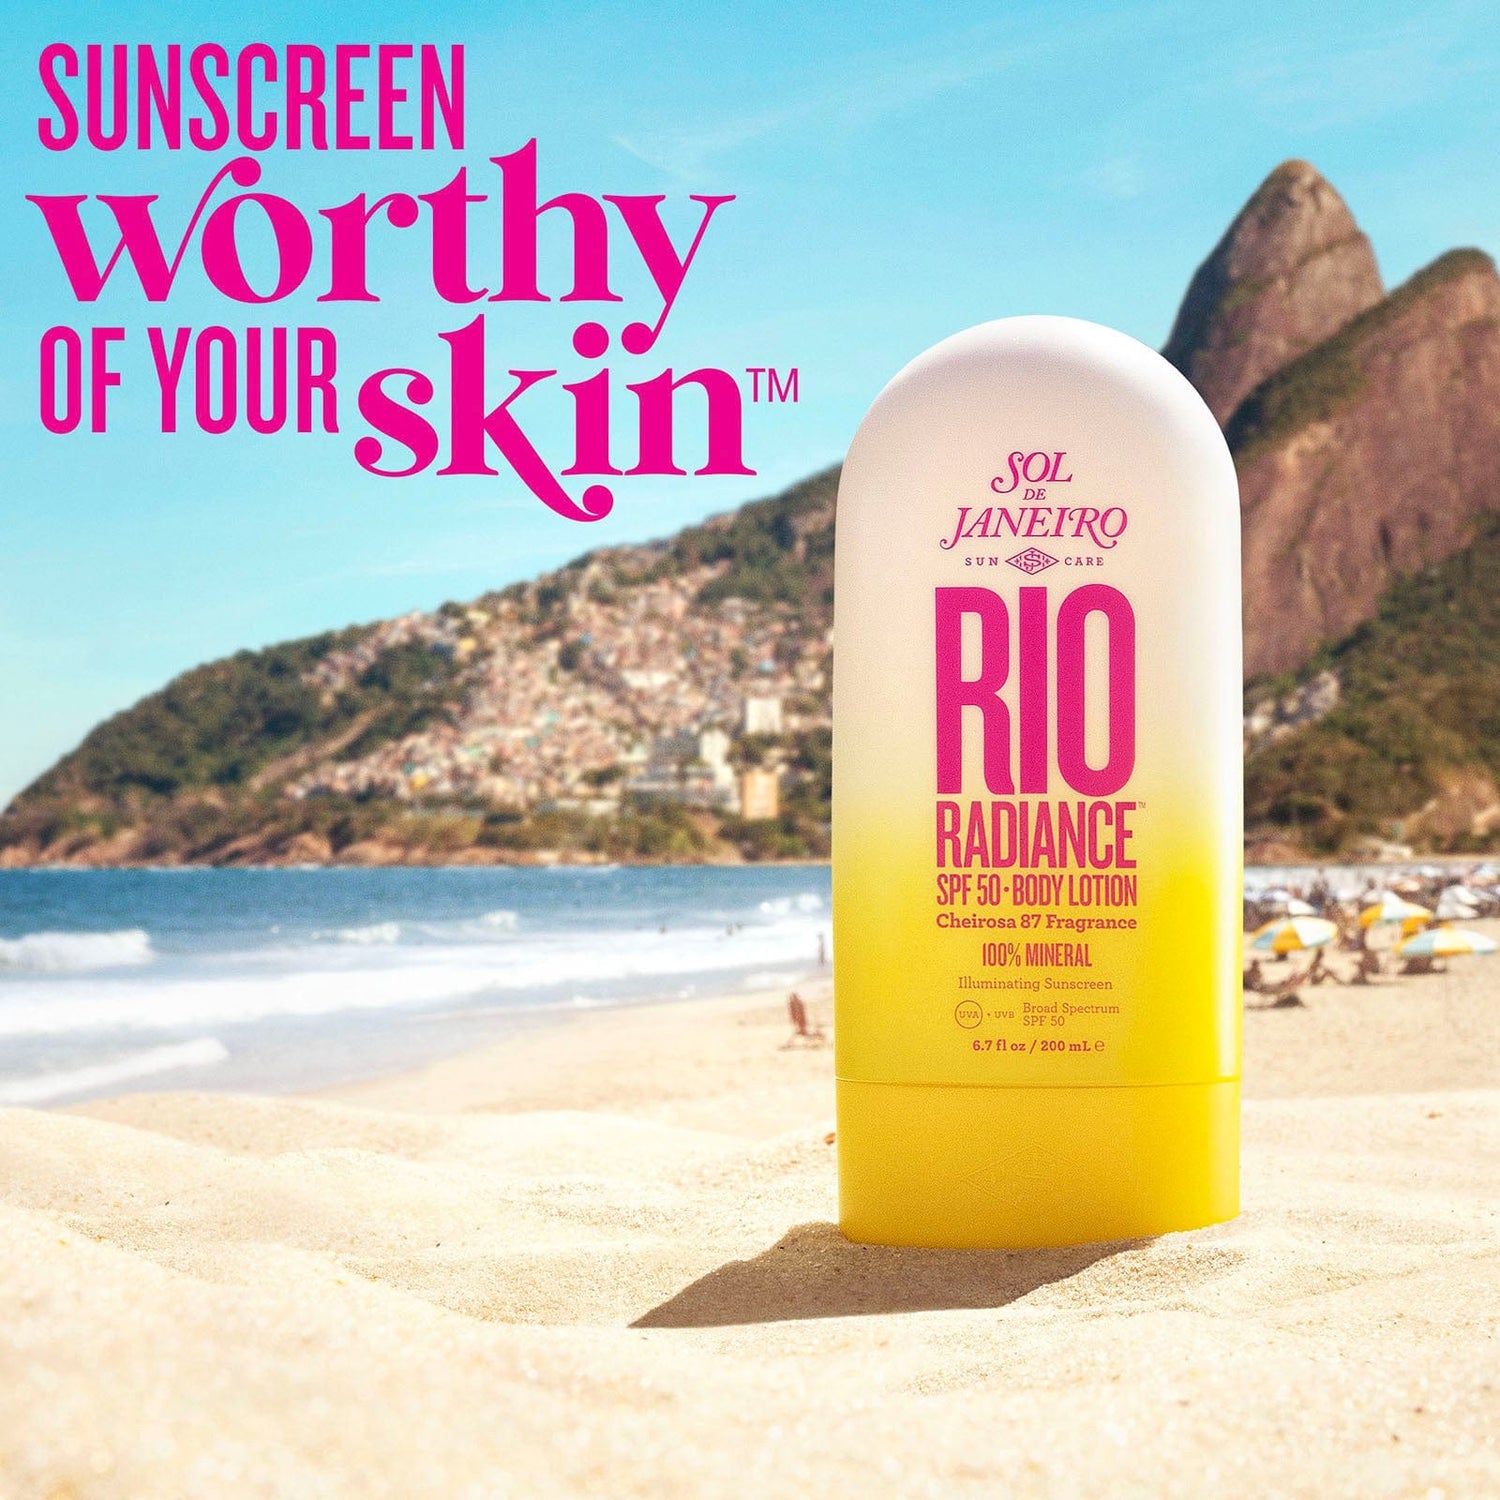 Sunscreen worthy of your skin